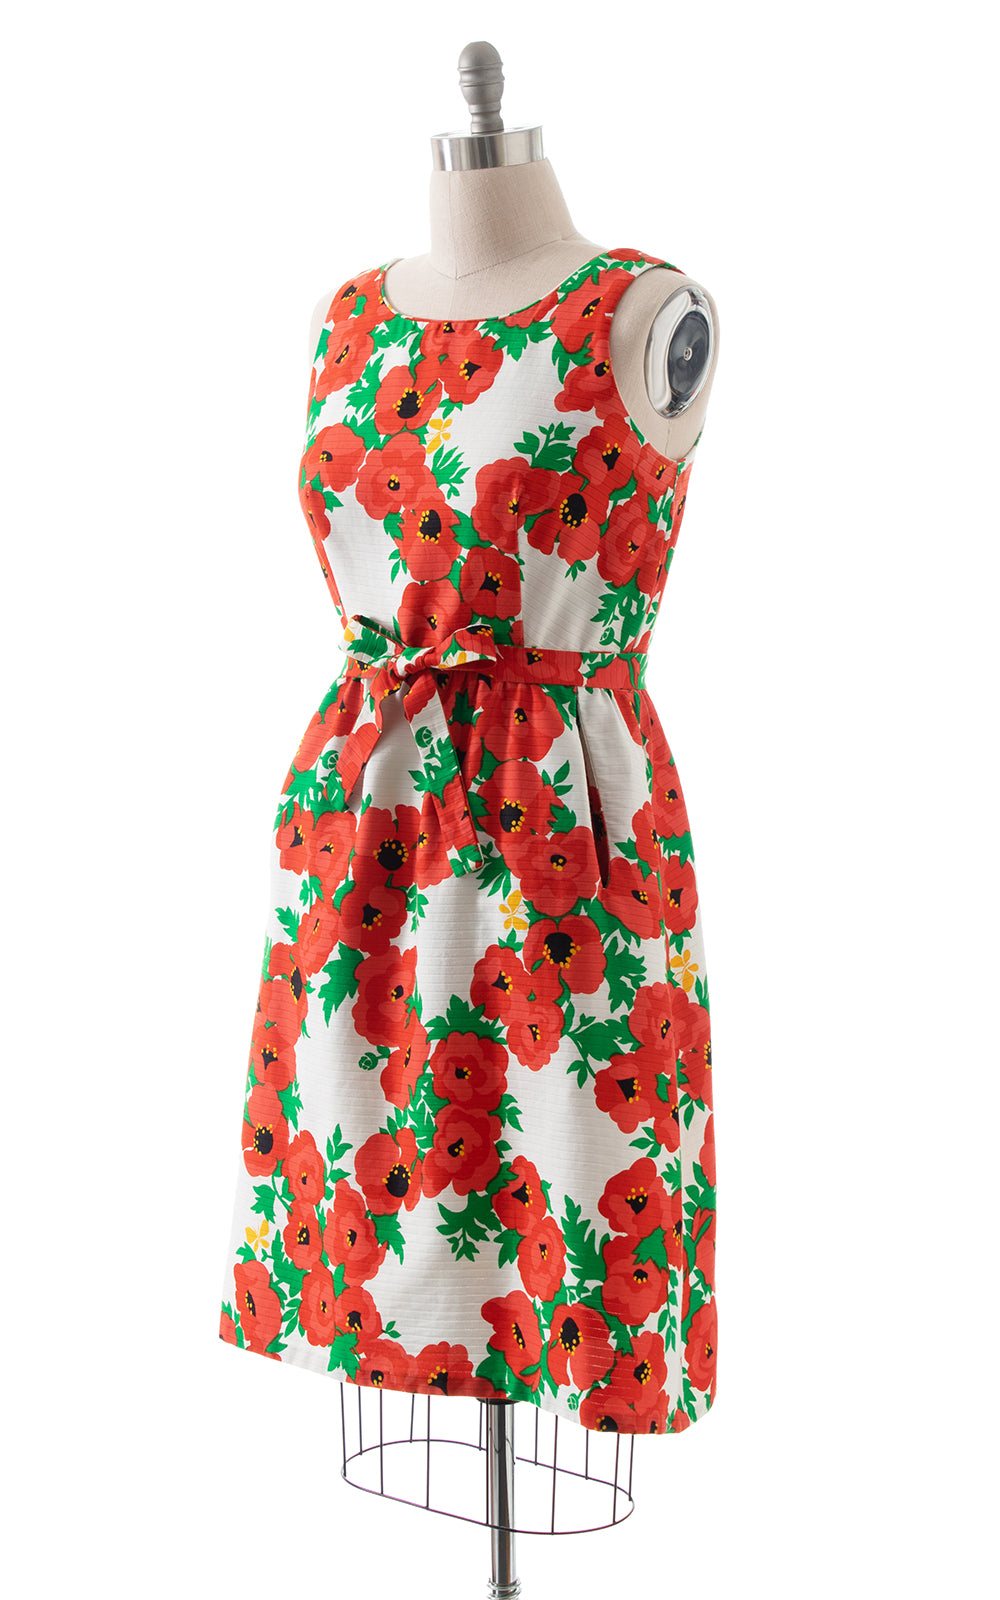 1970s Poppies & Butterflies Sundress with Pockets | medium/large